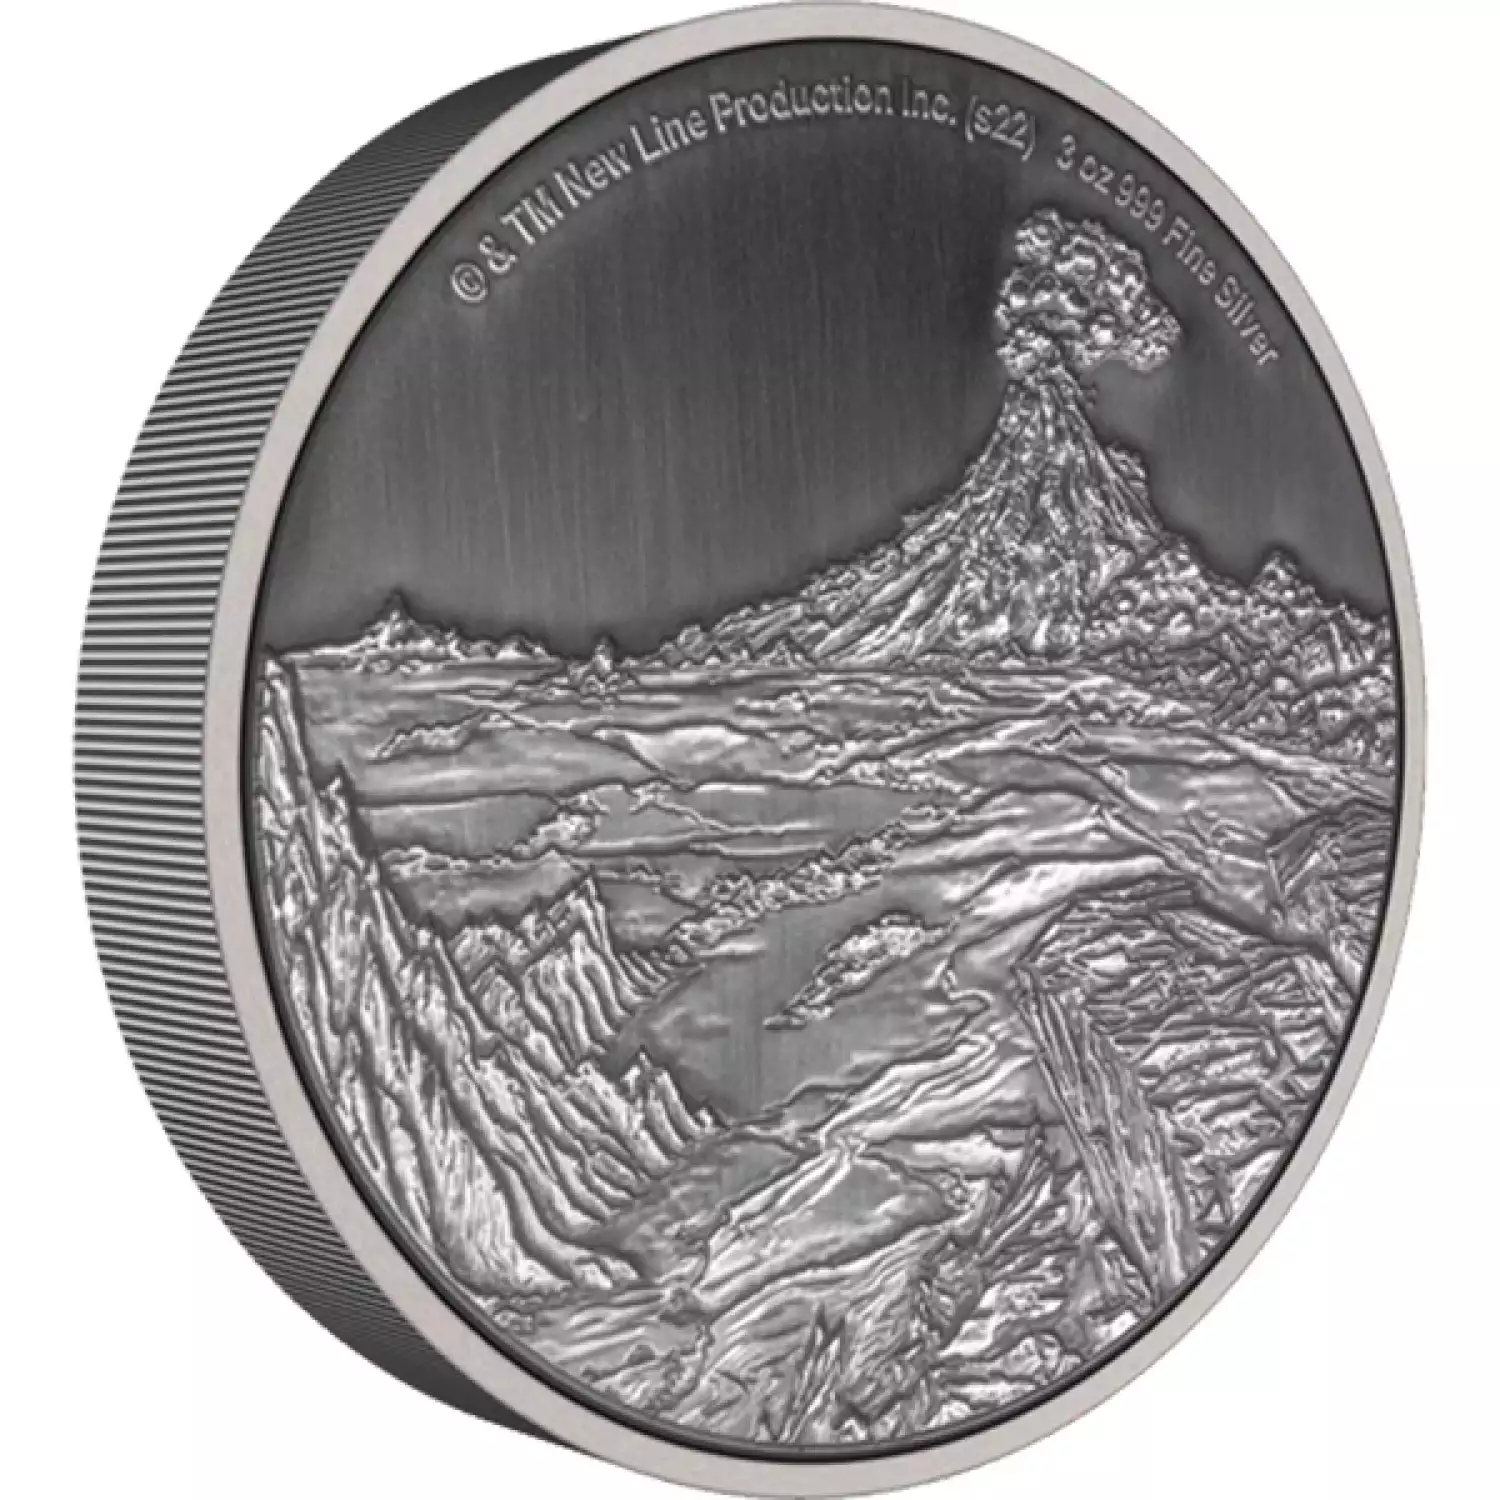 THE LORD OF THE RINGS - 2022 3oz Mount Doom Silver Coin (3)